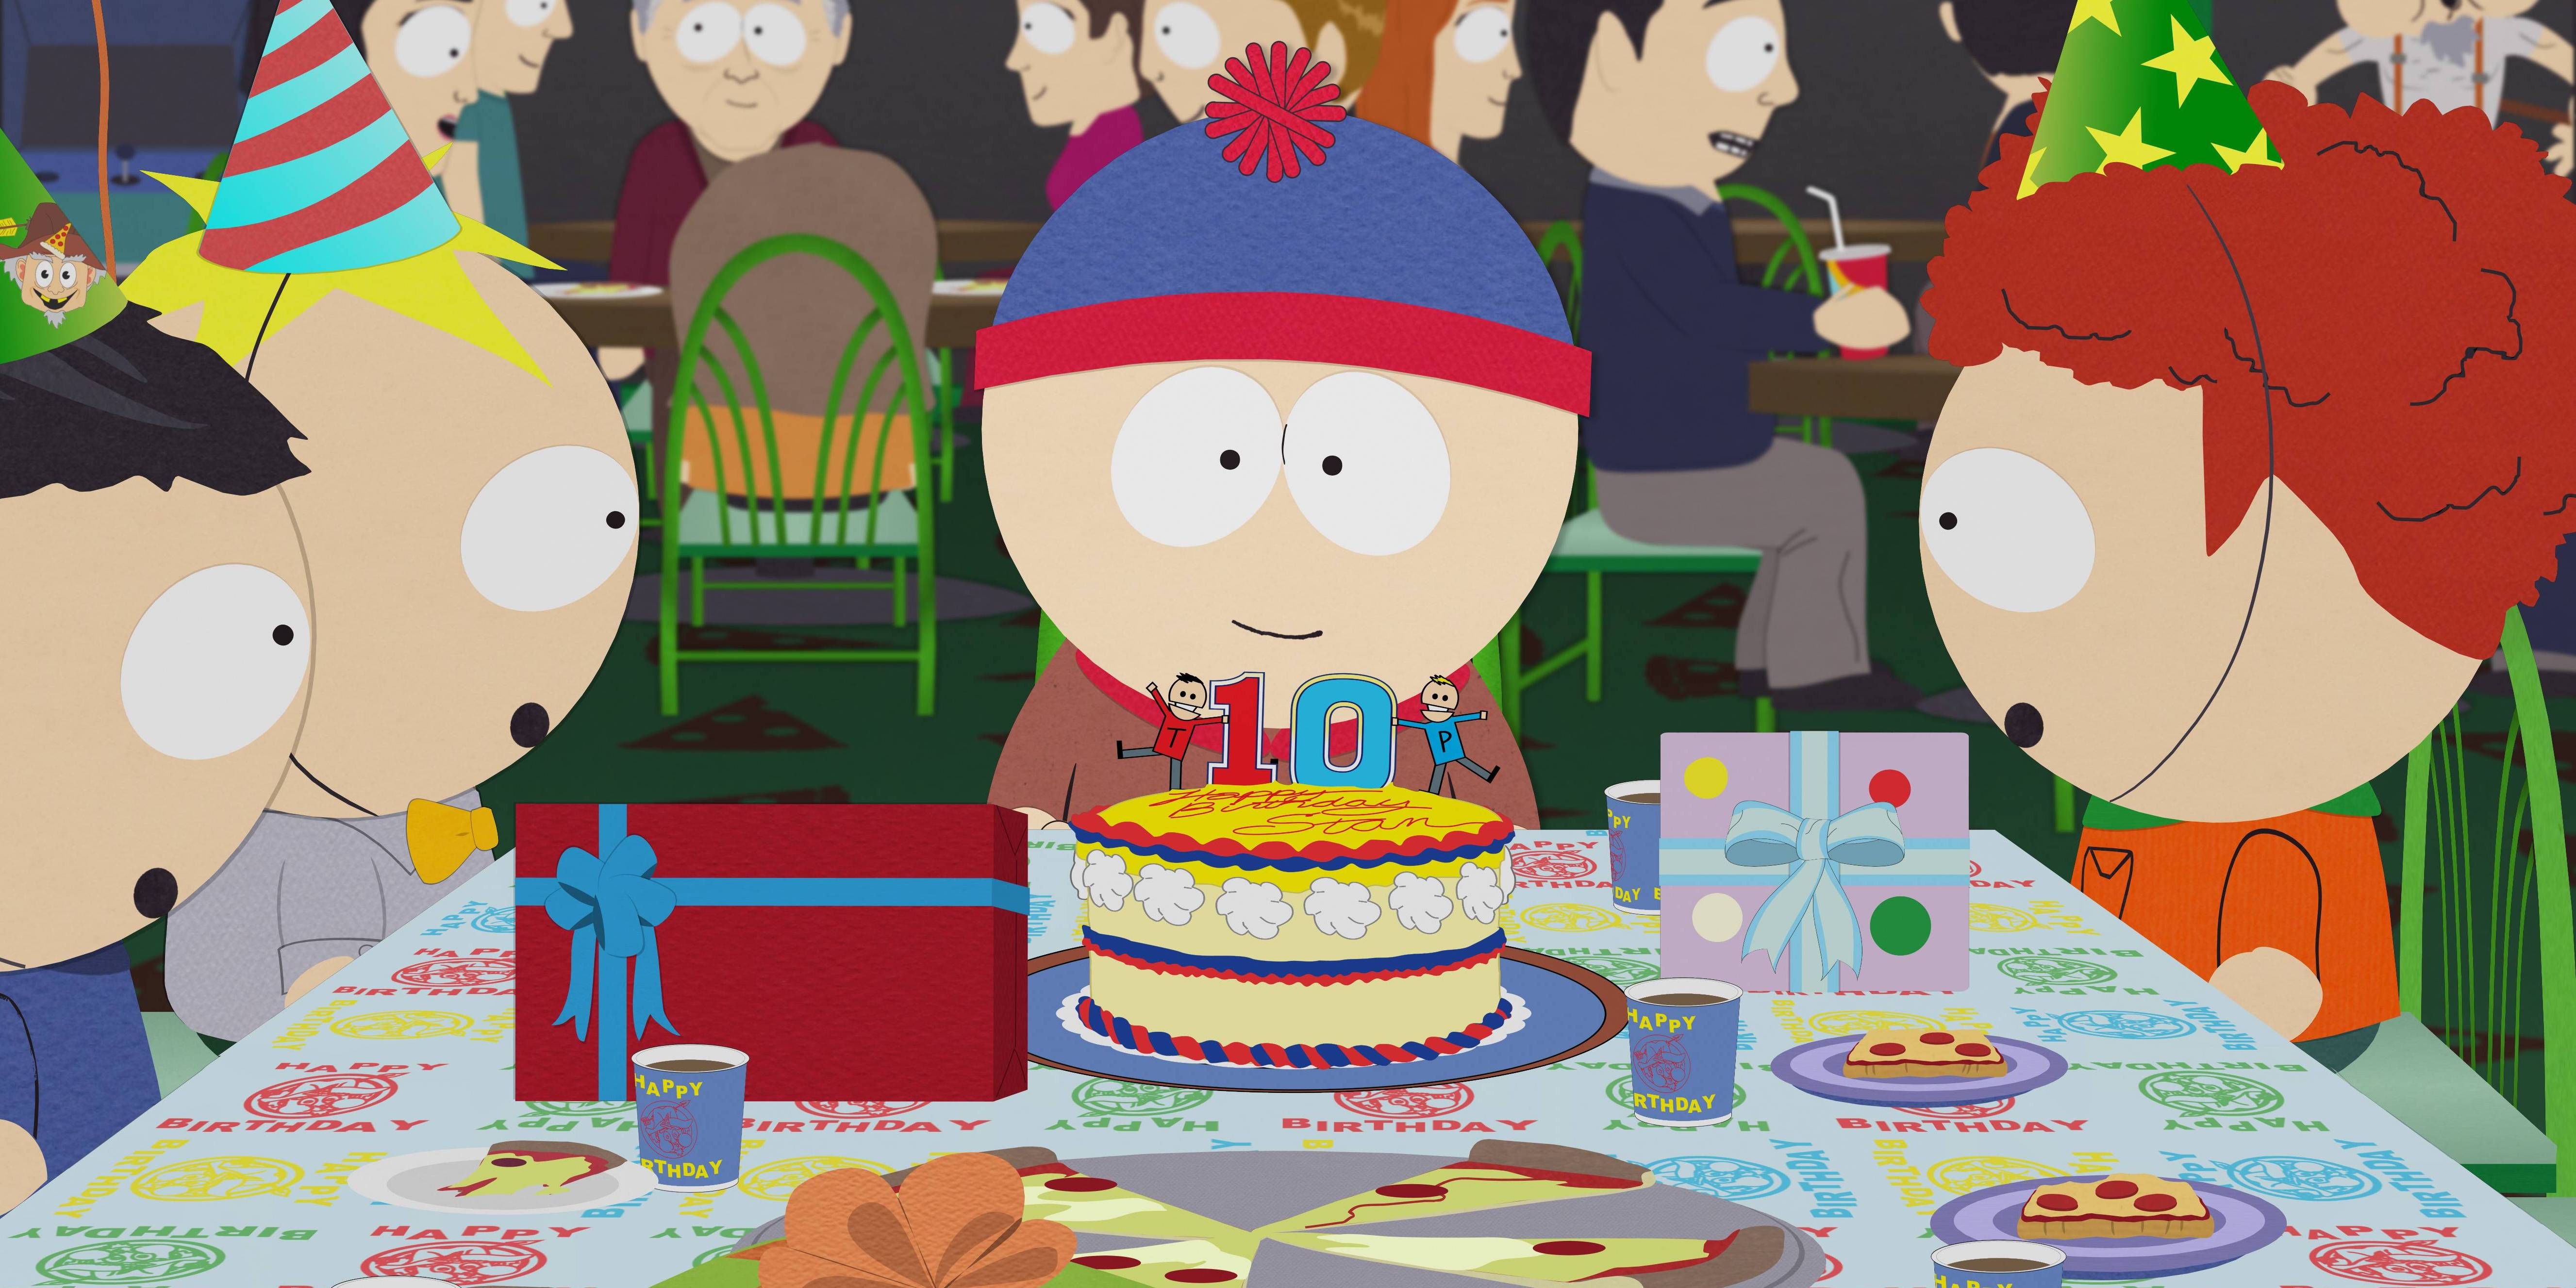 Stan Marsh, voiced by Trey Parker, sits behind his birthday cake on South Park.